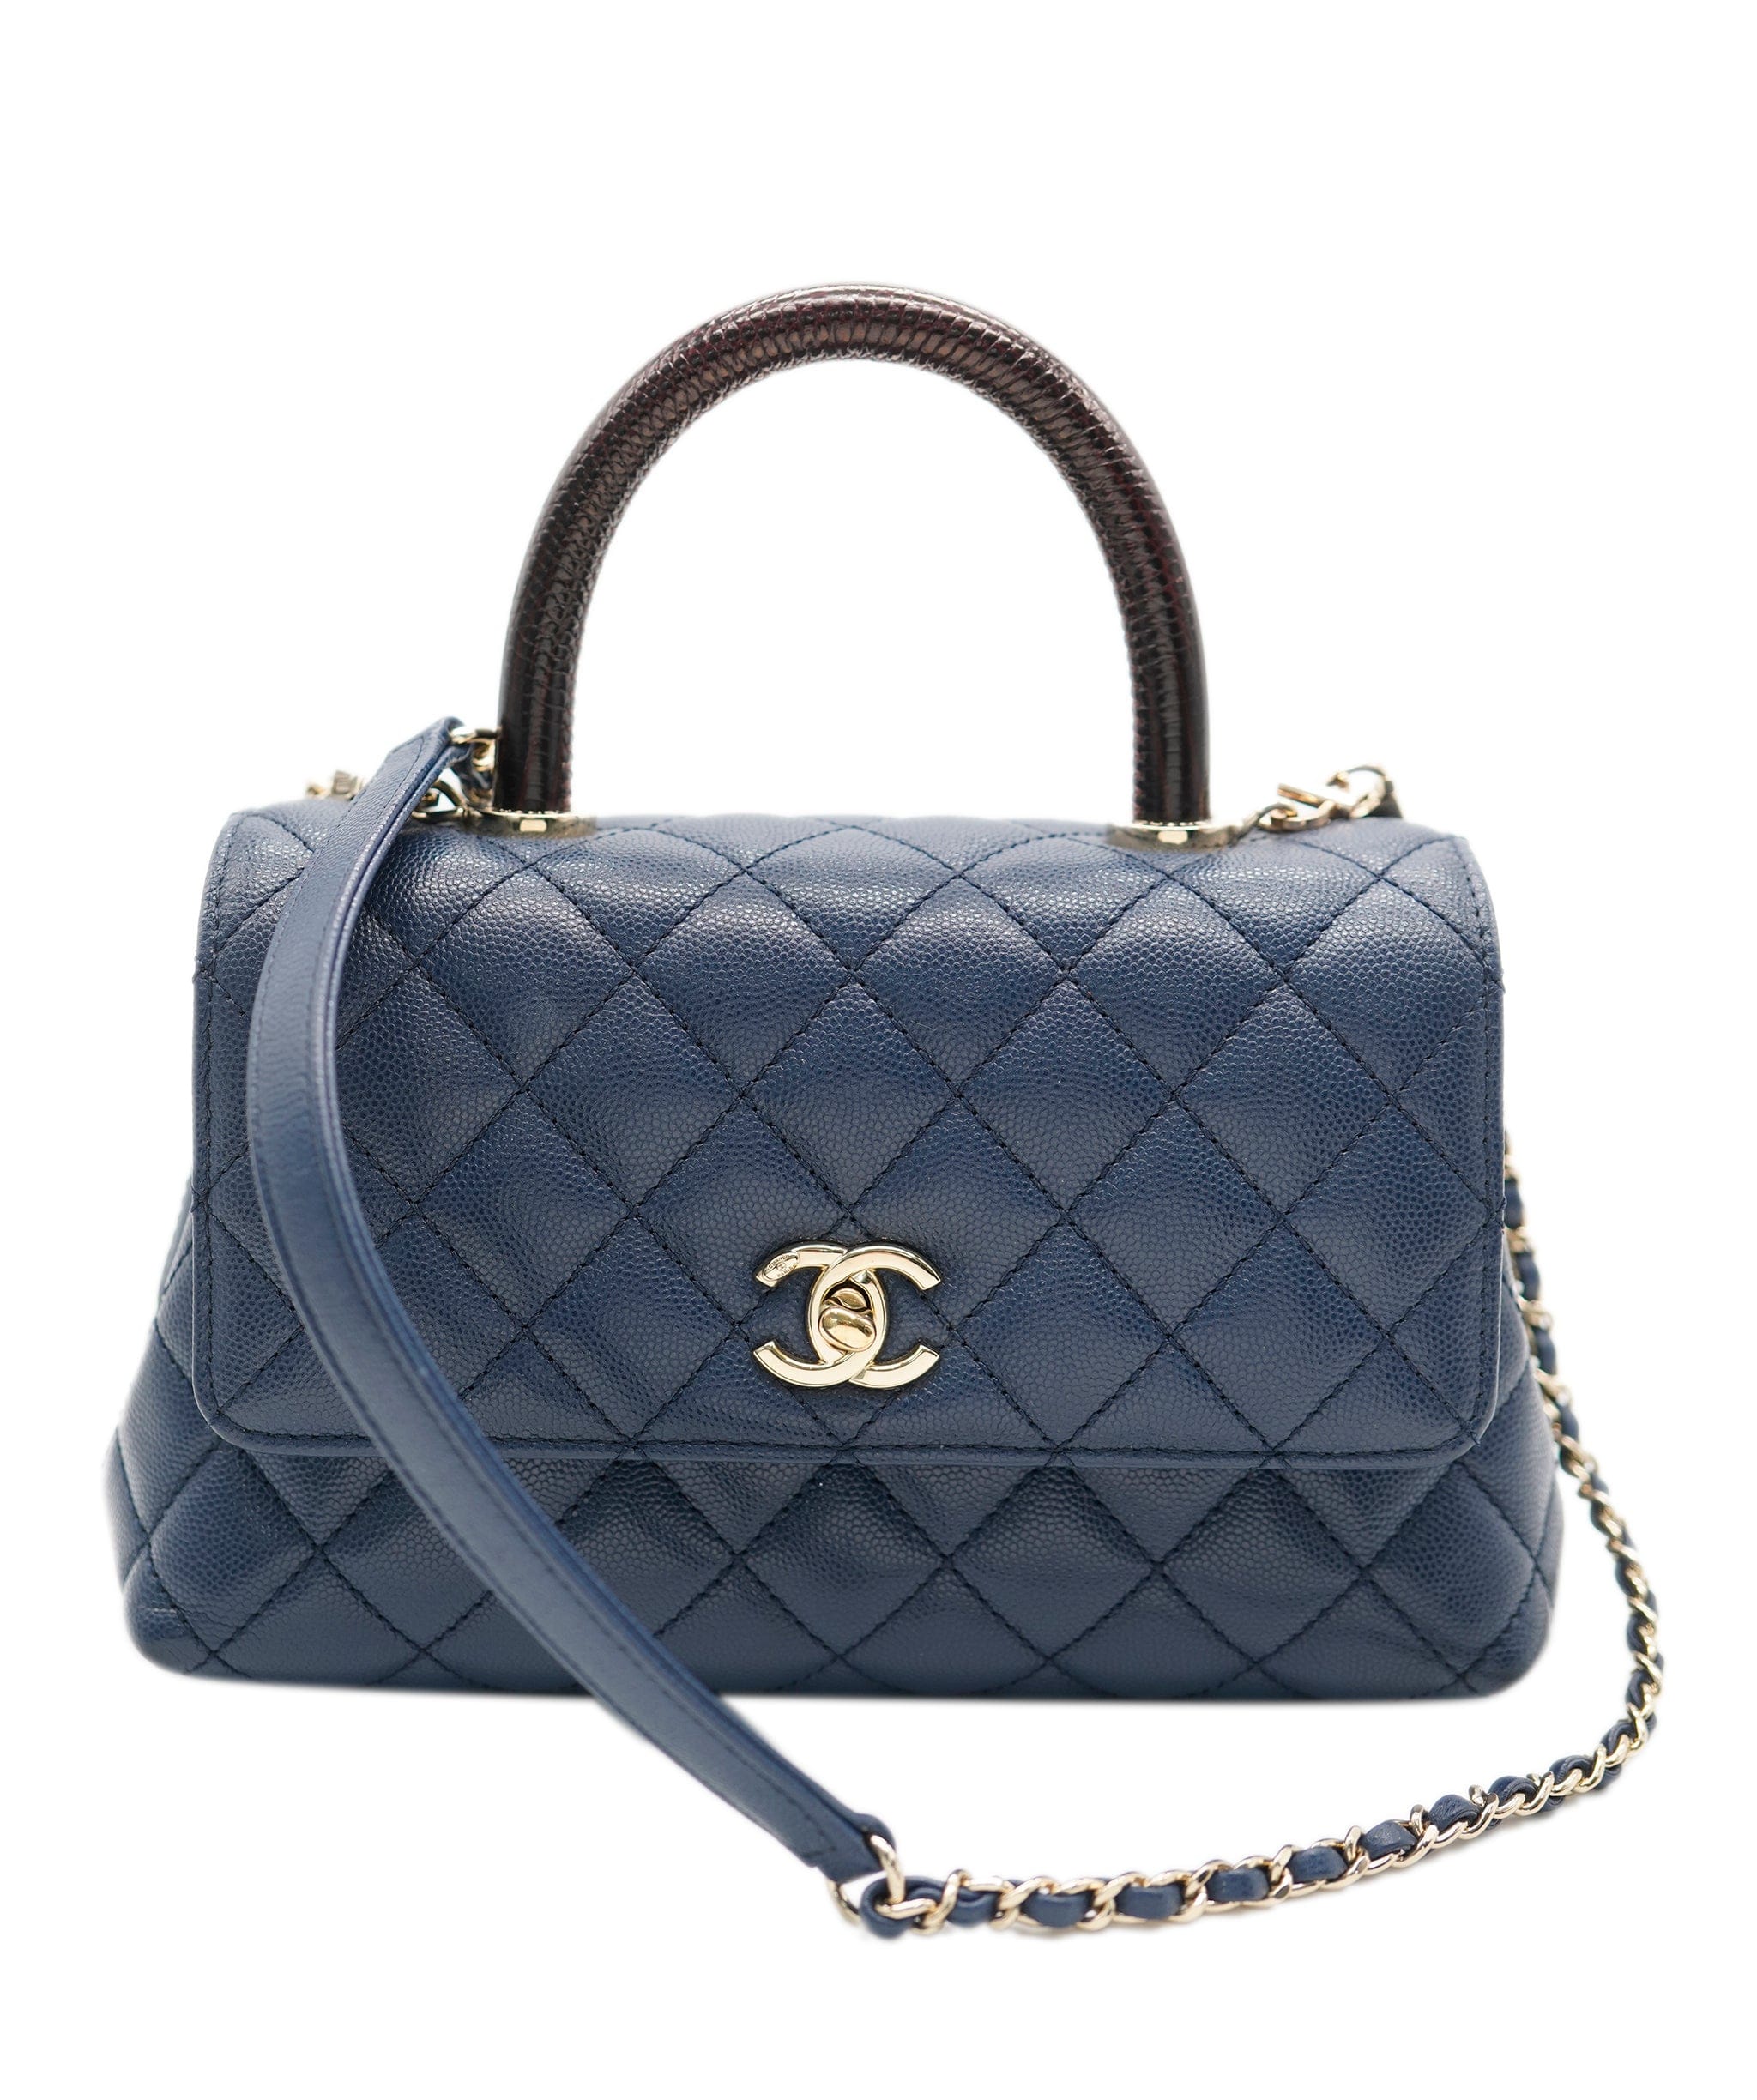 Chanel Chanel Coco Navy Top Handle with Lizard  ALC1342